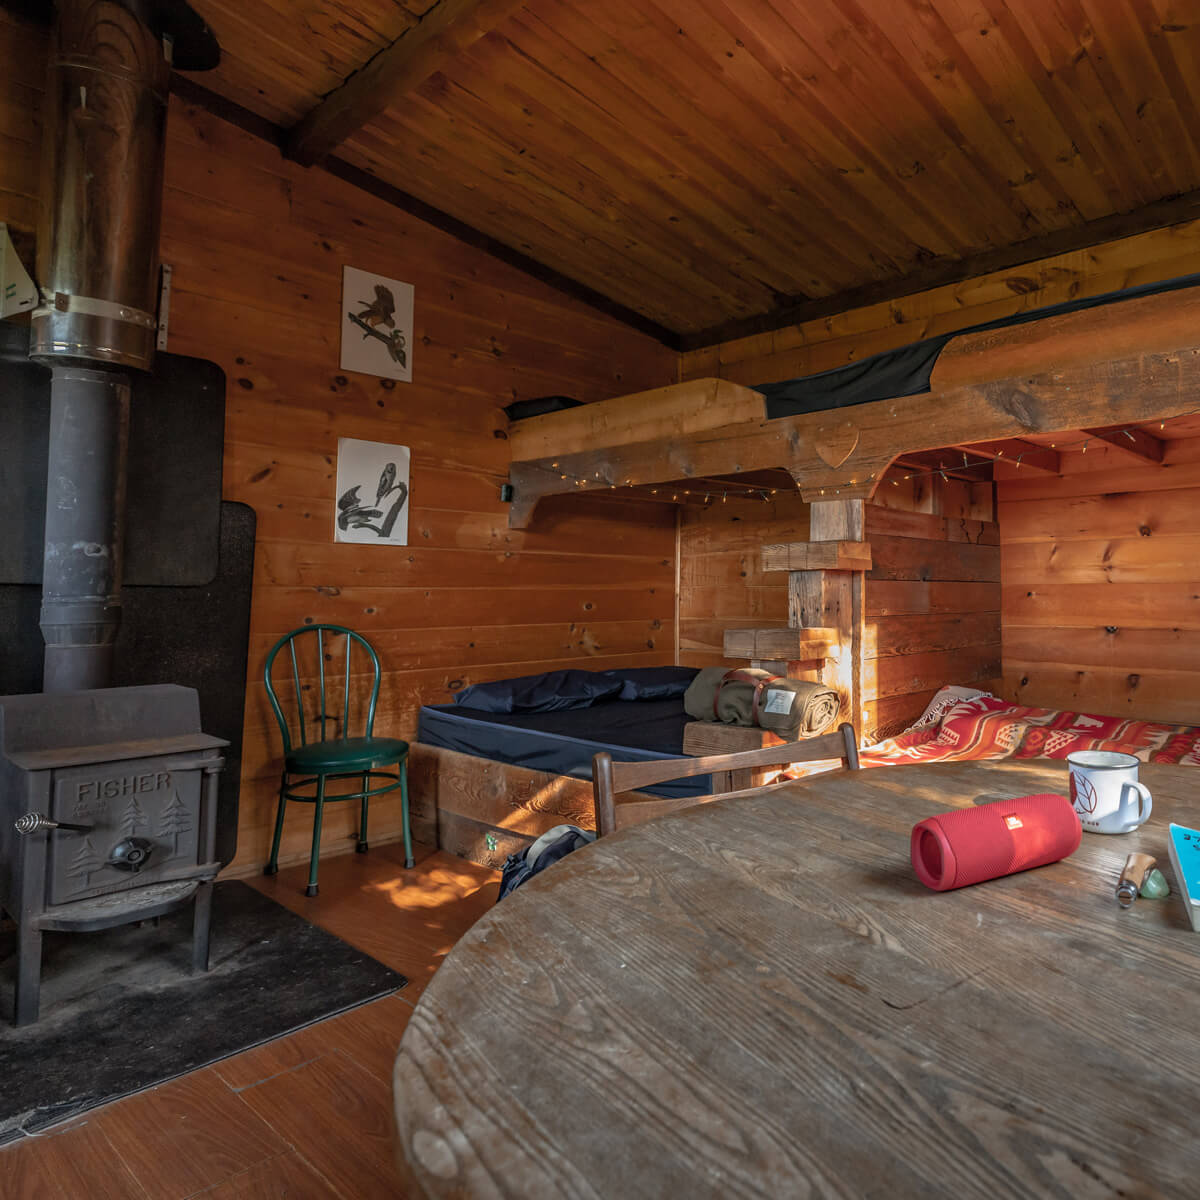 Discover the 7 types of ecological accommodation offered at Au Diable Vert - 4-season mountain and outdoor resort at Glen Sutton